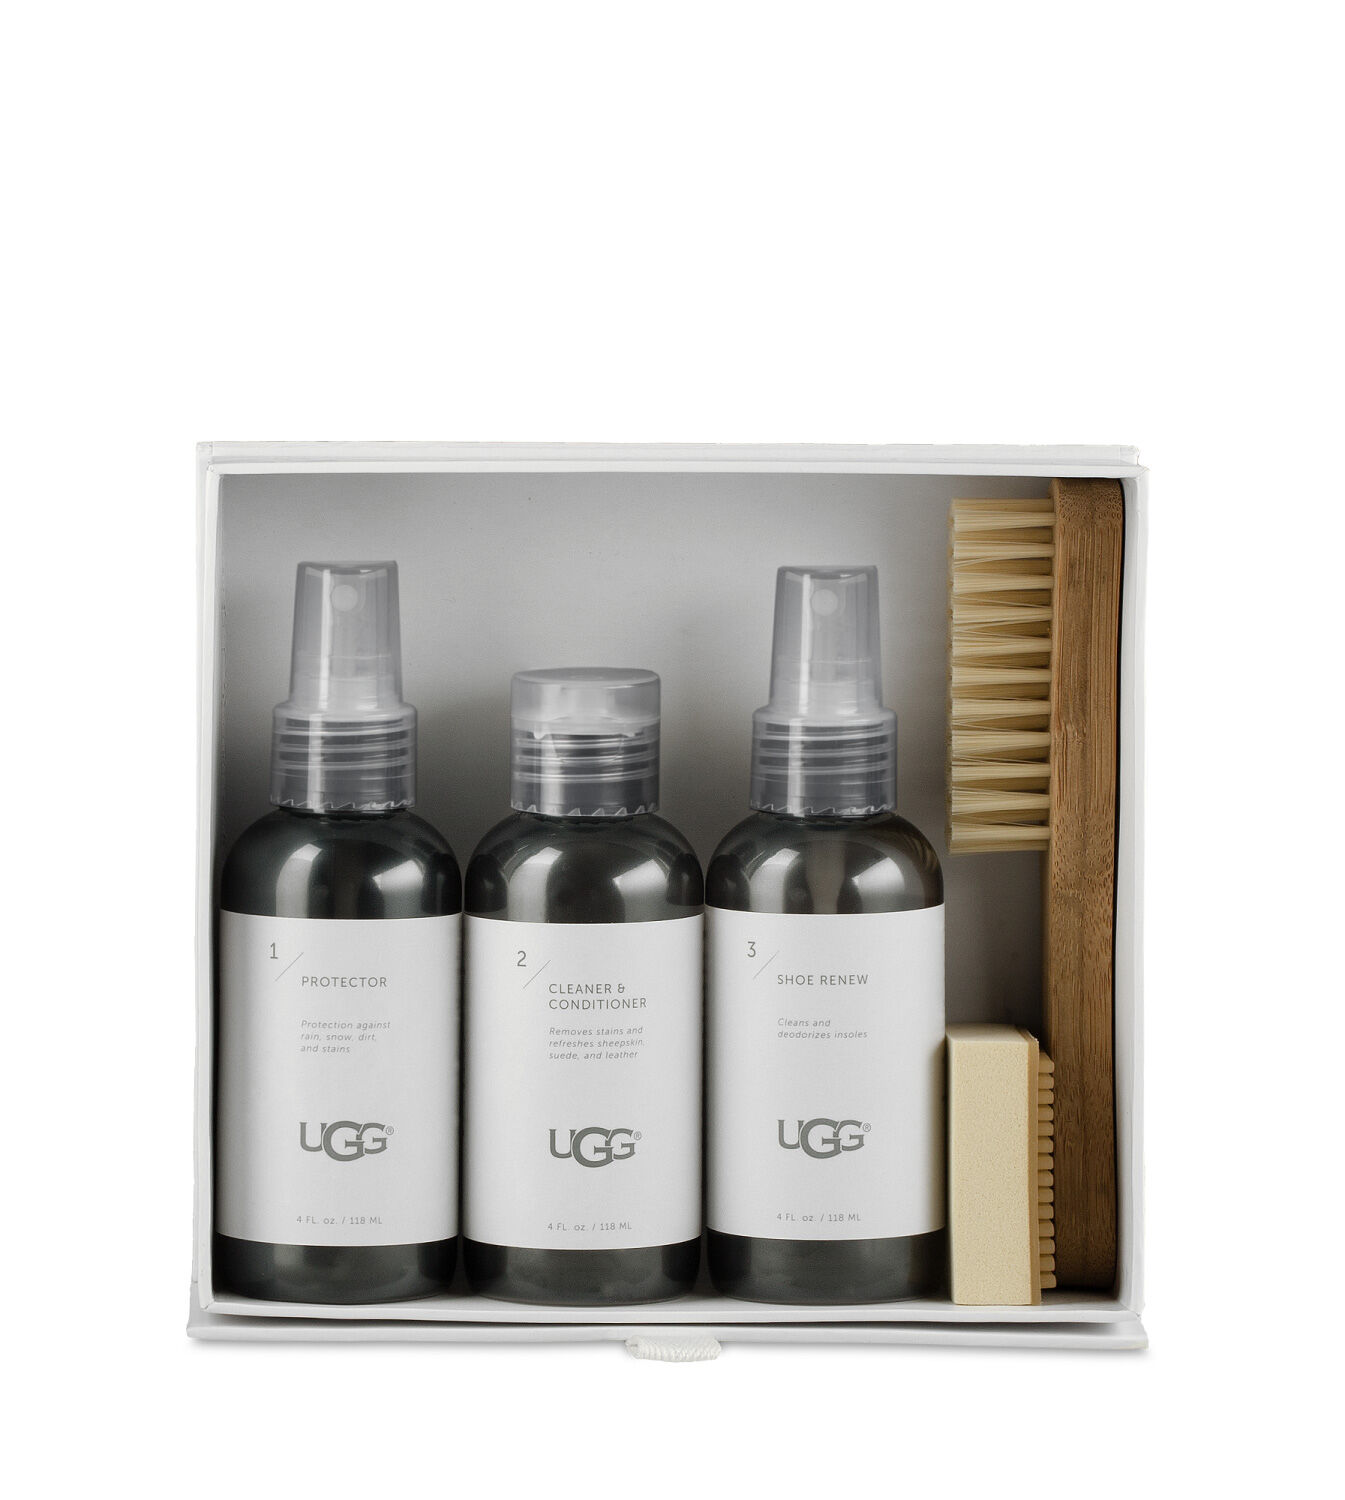 how to use ugg sheepskin cleaner and conditioner